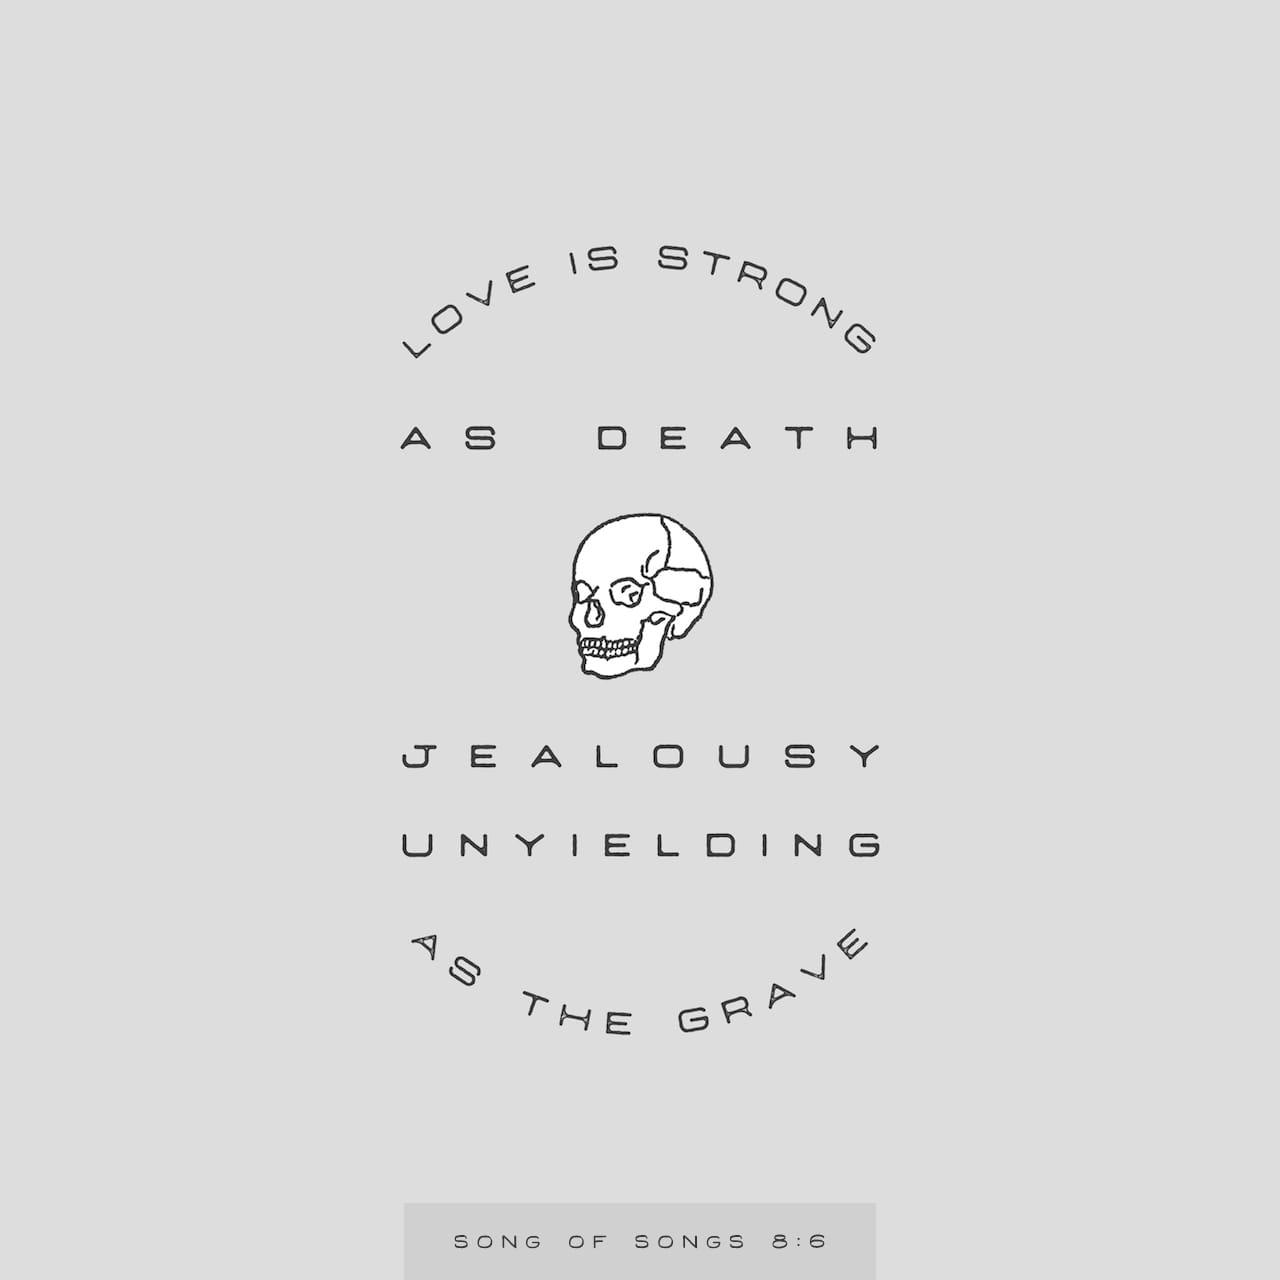 Bible Verse of the Day - day 84 - image 13894 (Song of Solomon 8:1-14)